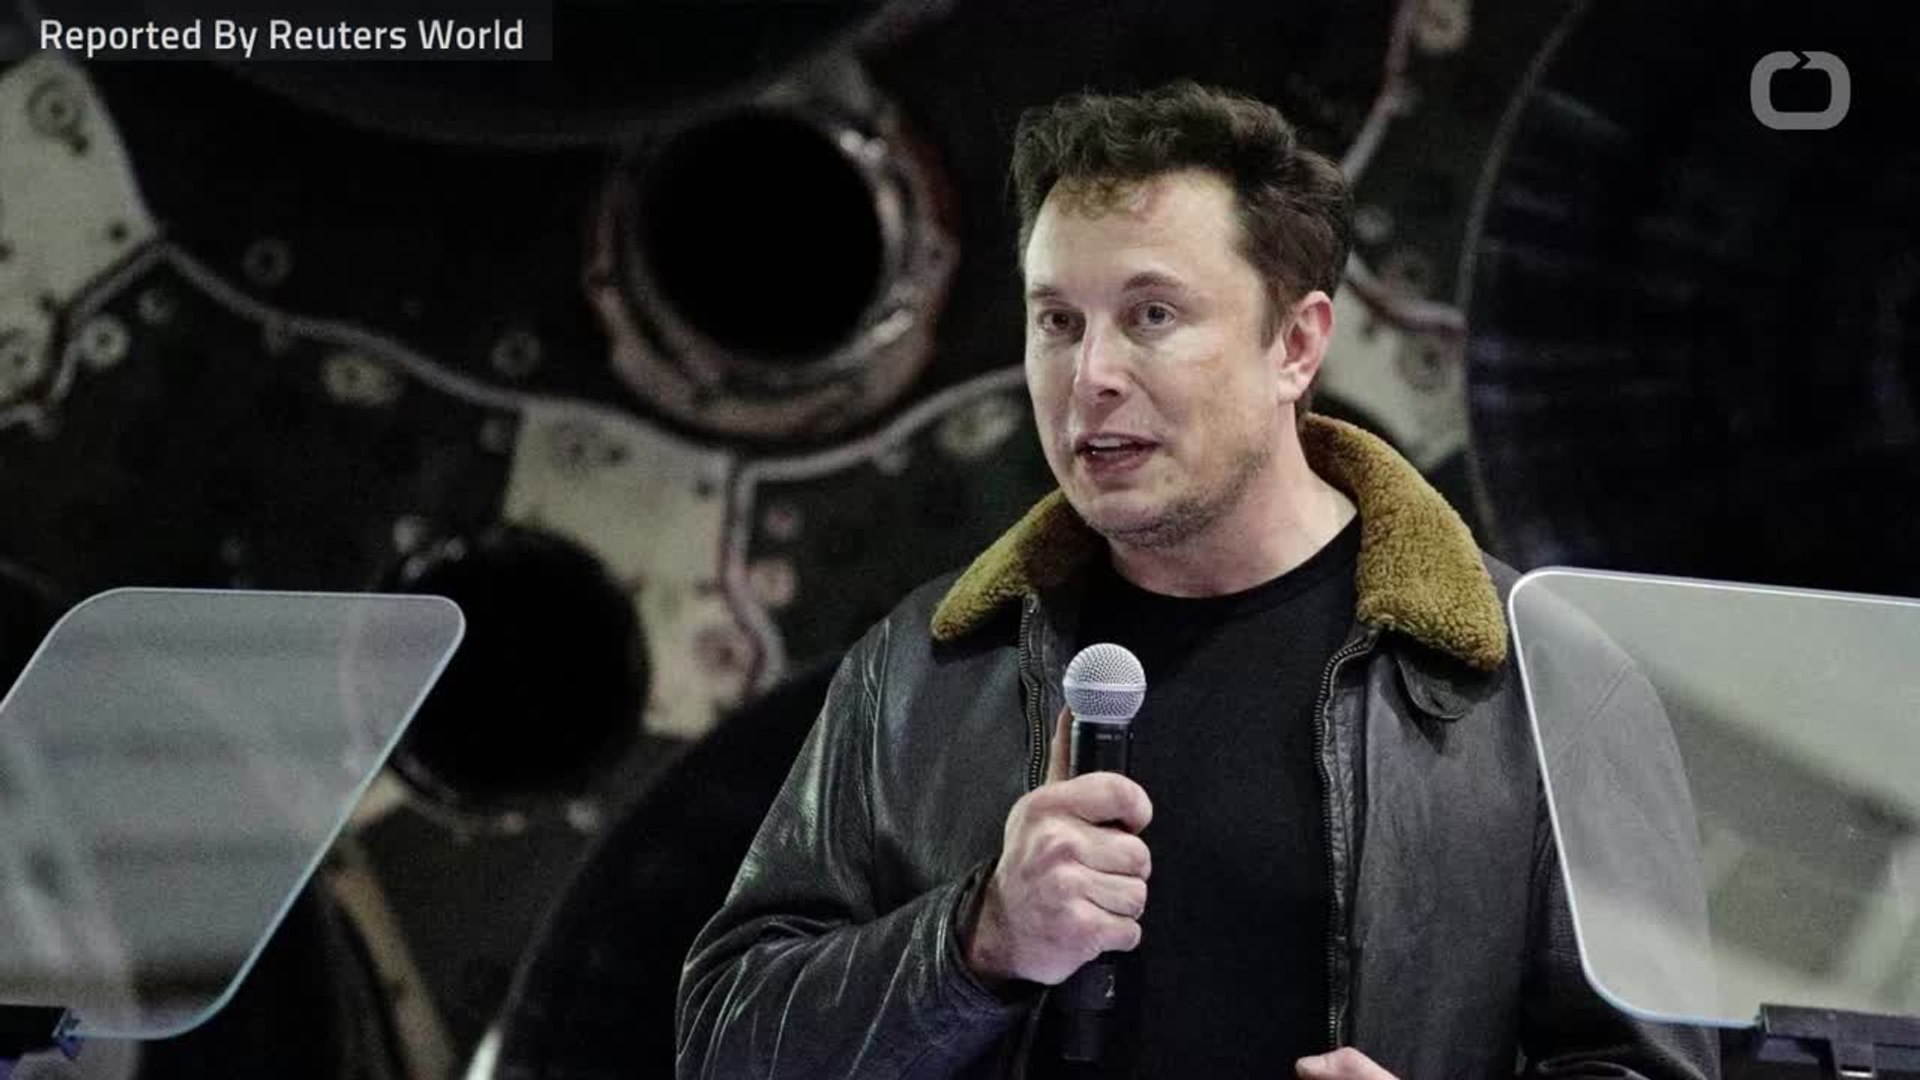 SpaceX To Drop 10% Of Employees